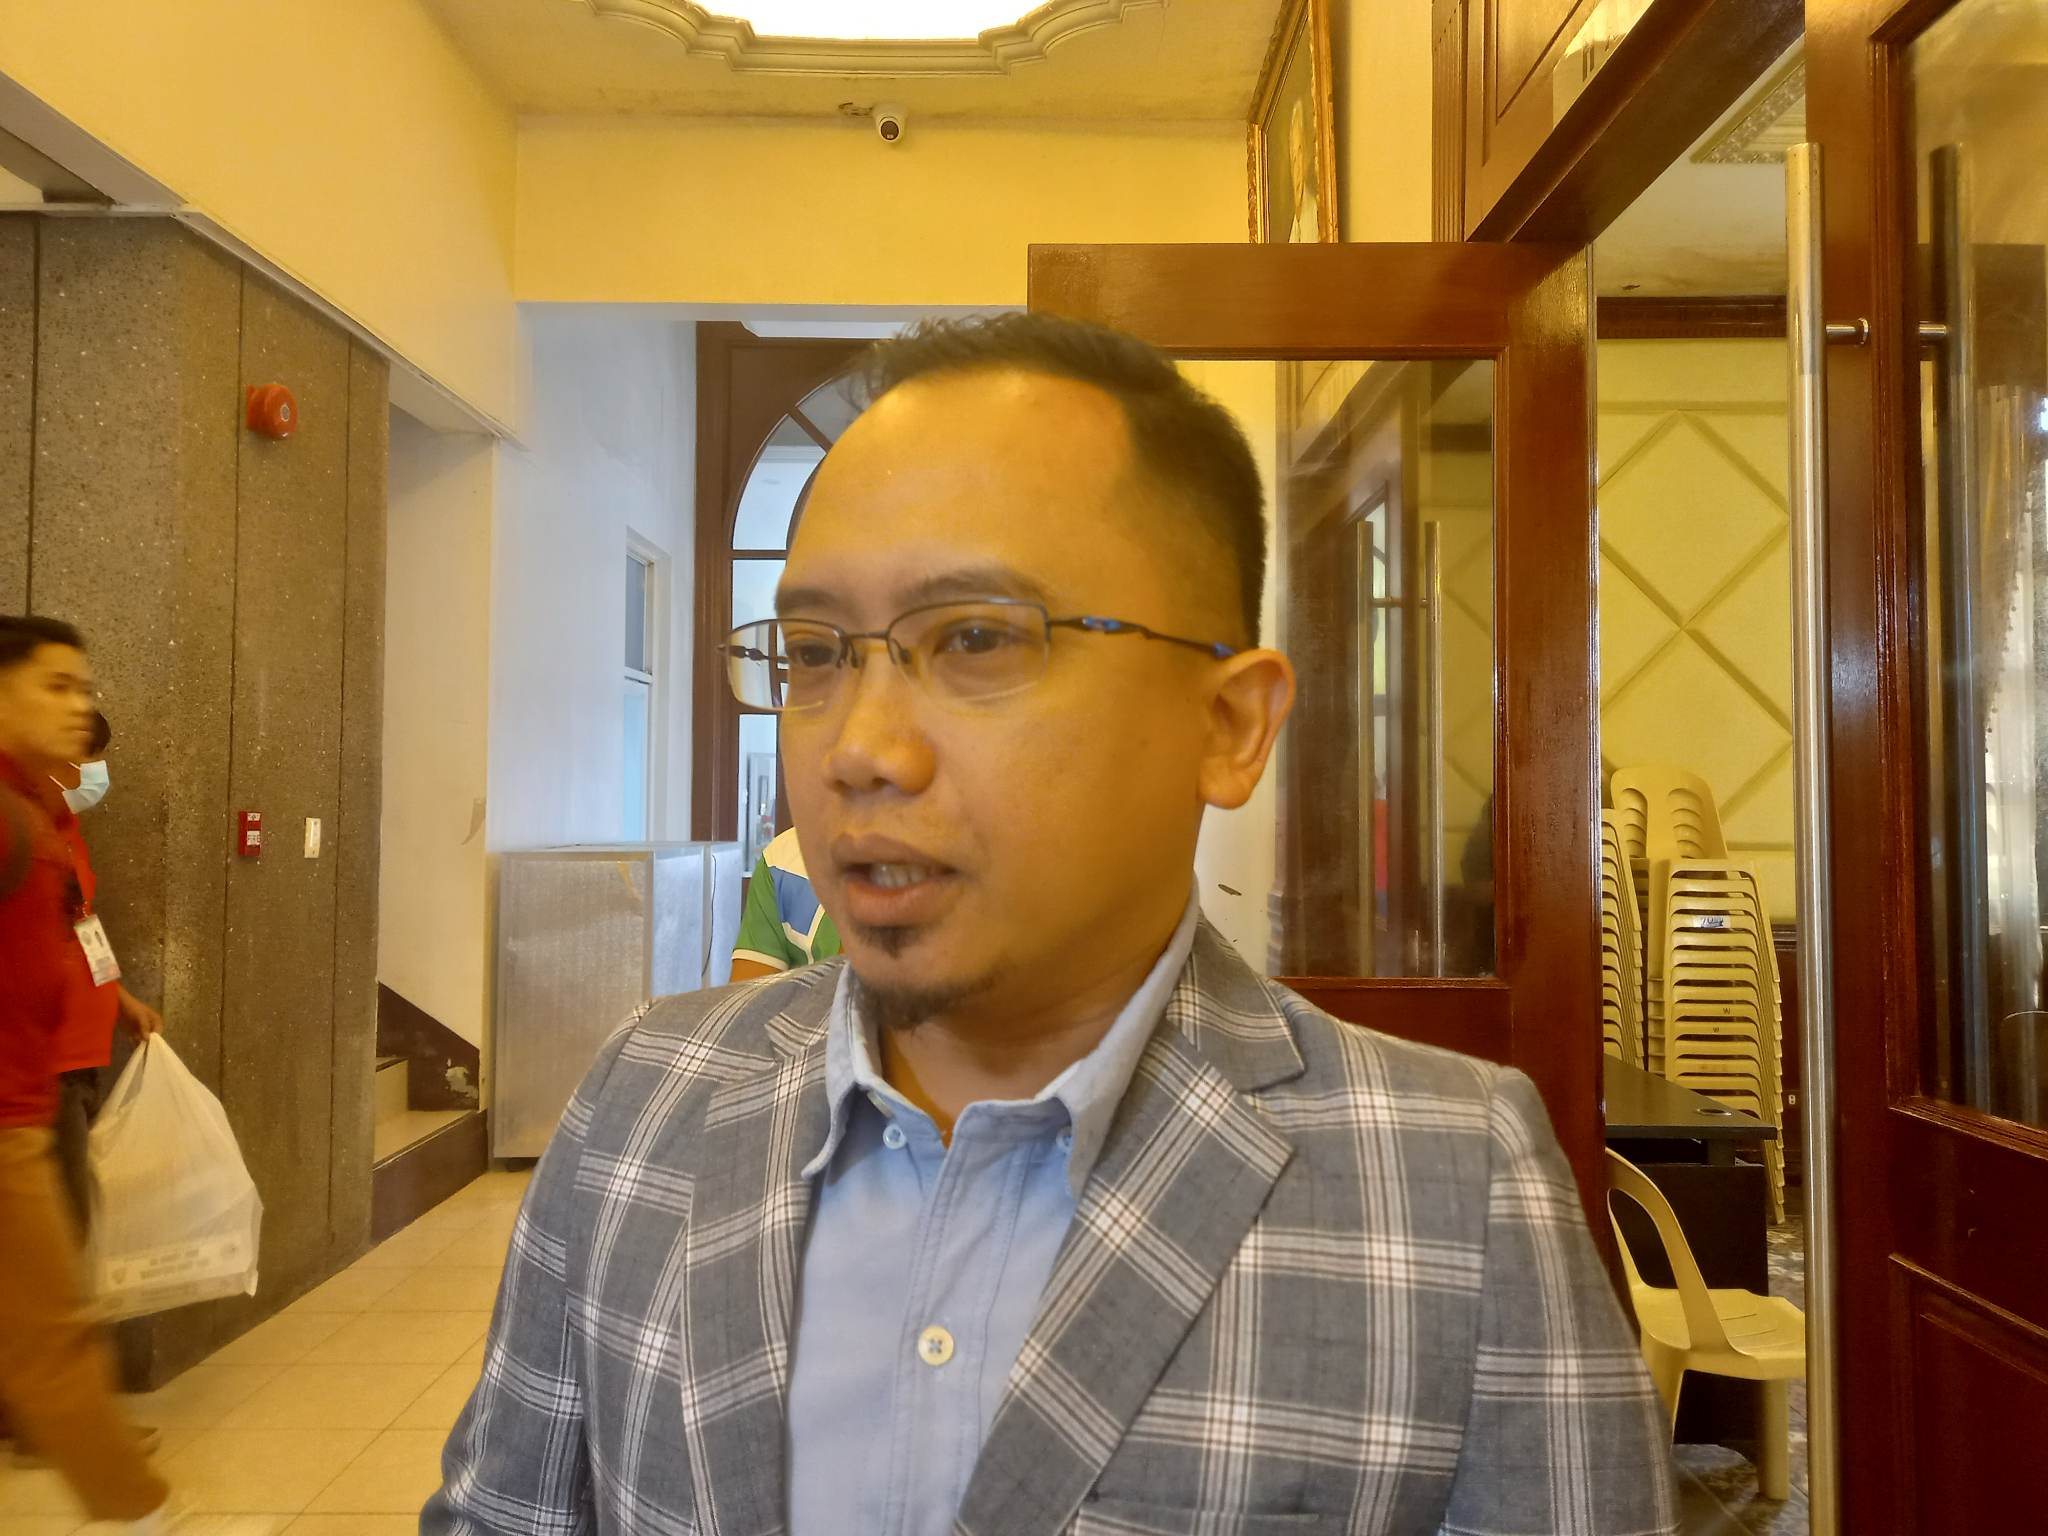 Mandaue BPLO chief to businesses: Sell only what’s allowed in biz permit to avoid sanctions | Cebu Daily News